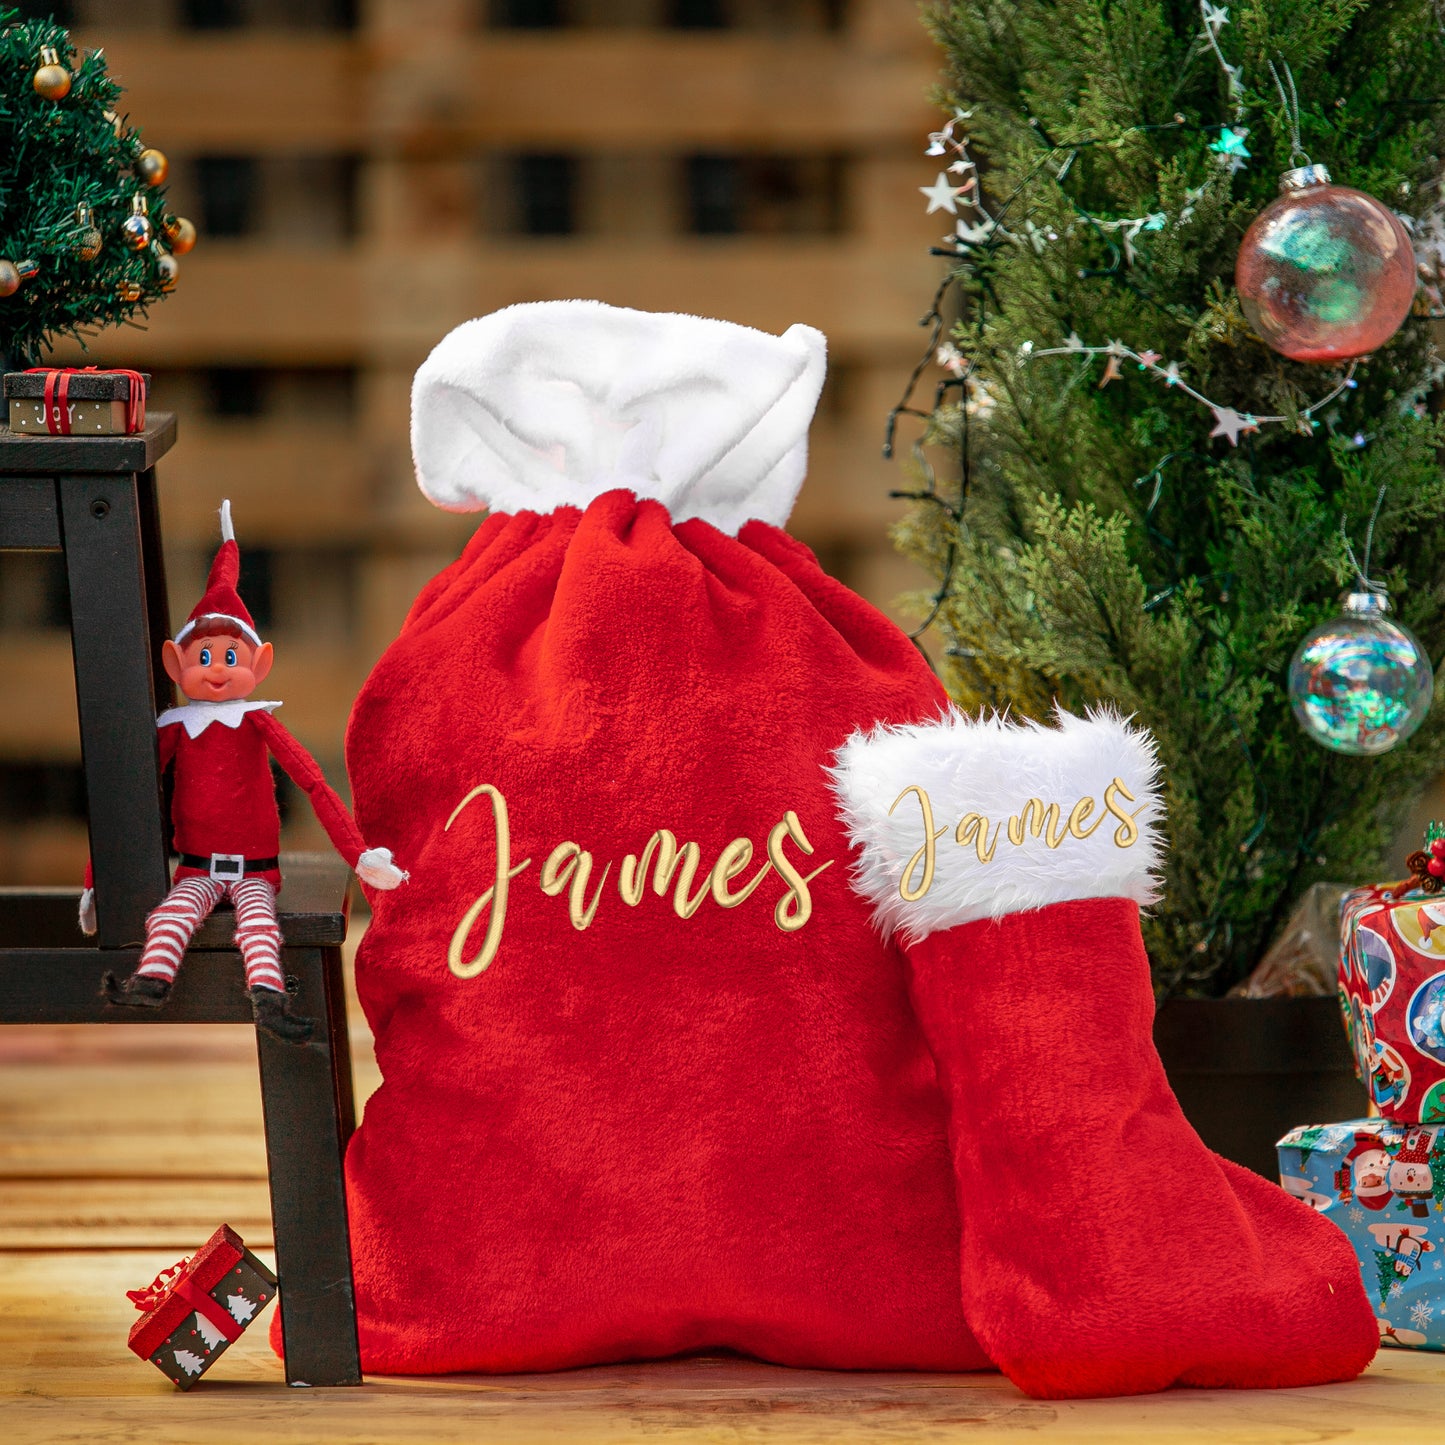 Personalised Christmas Plush Red Santa Sack and/or Stocking Embroidered Name Gift Set  - Always Looking Good - Standard Stocking and Sack  